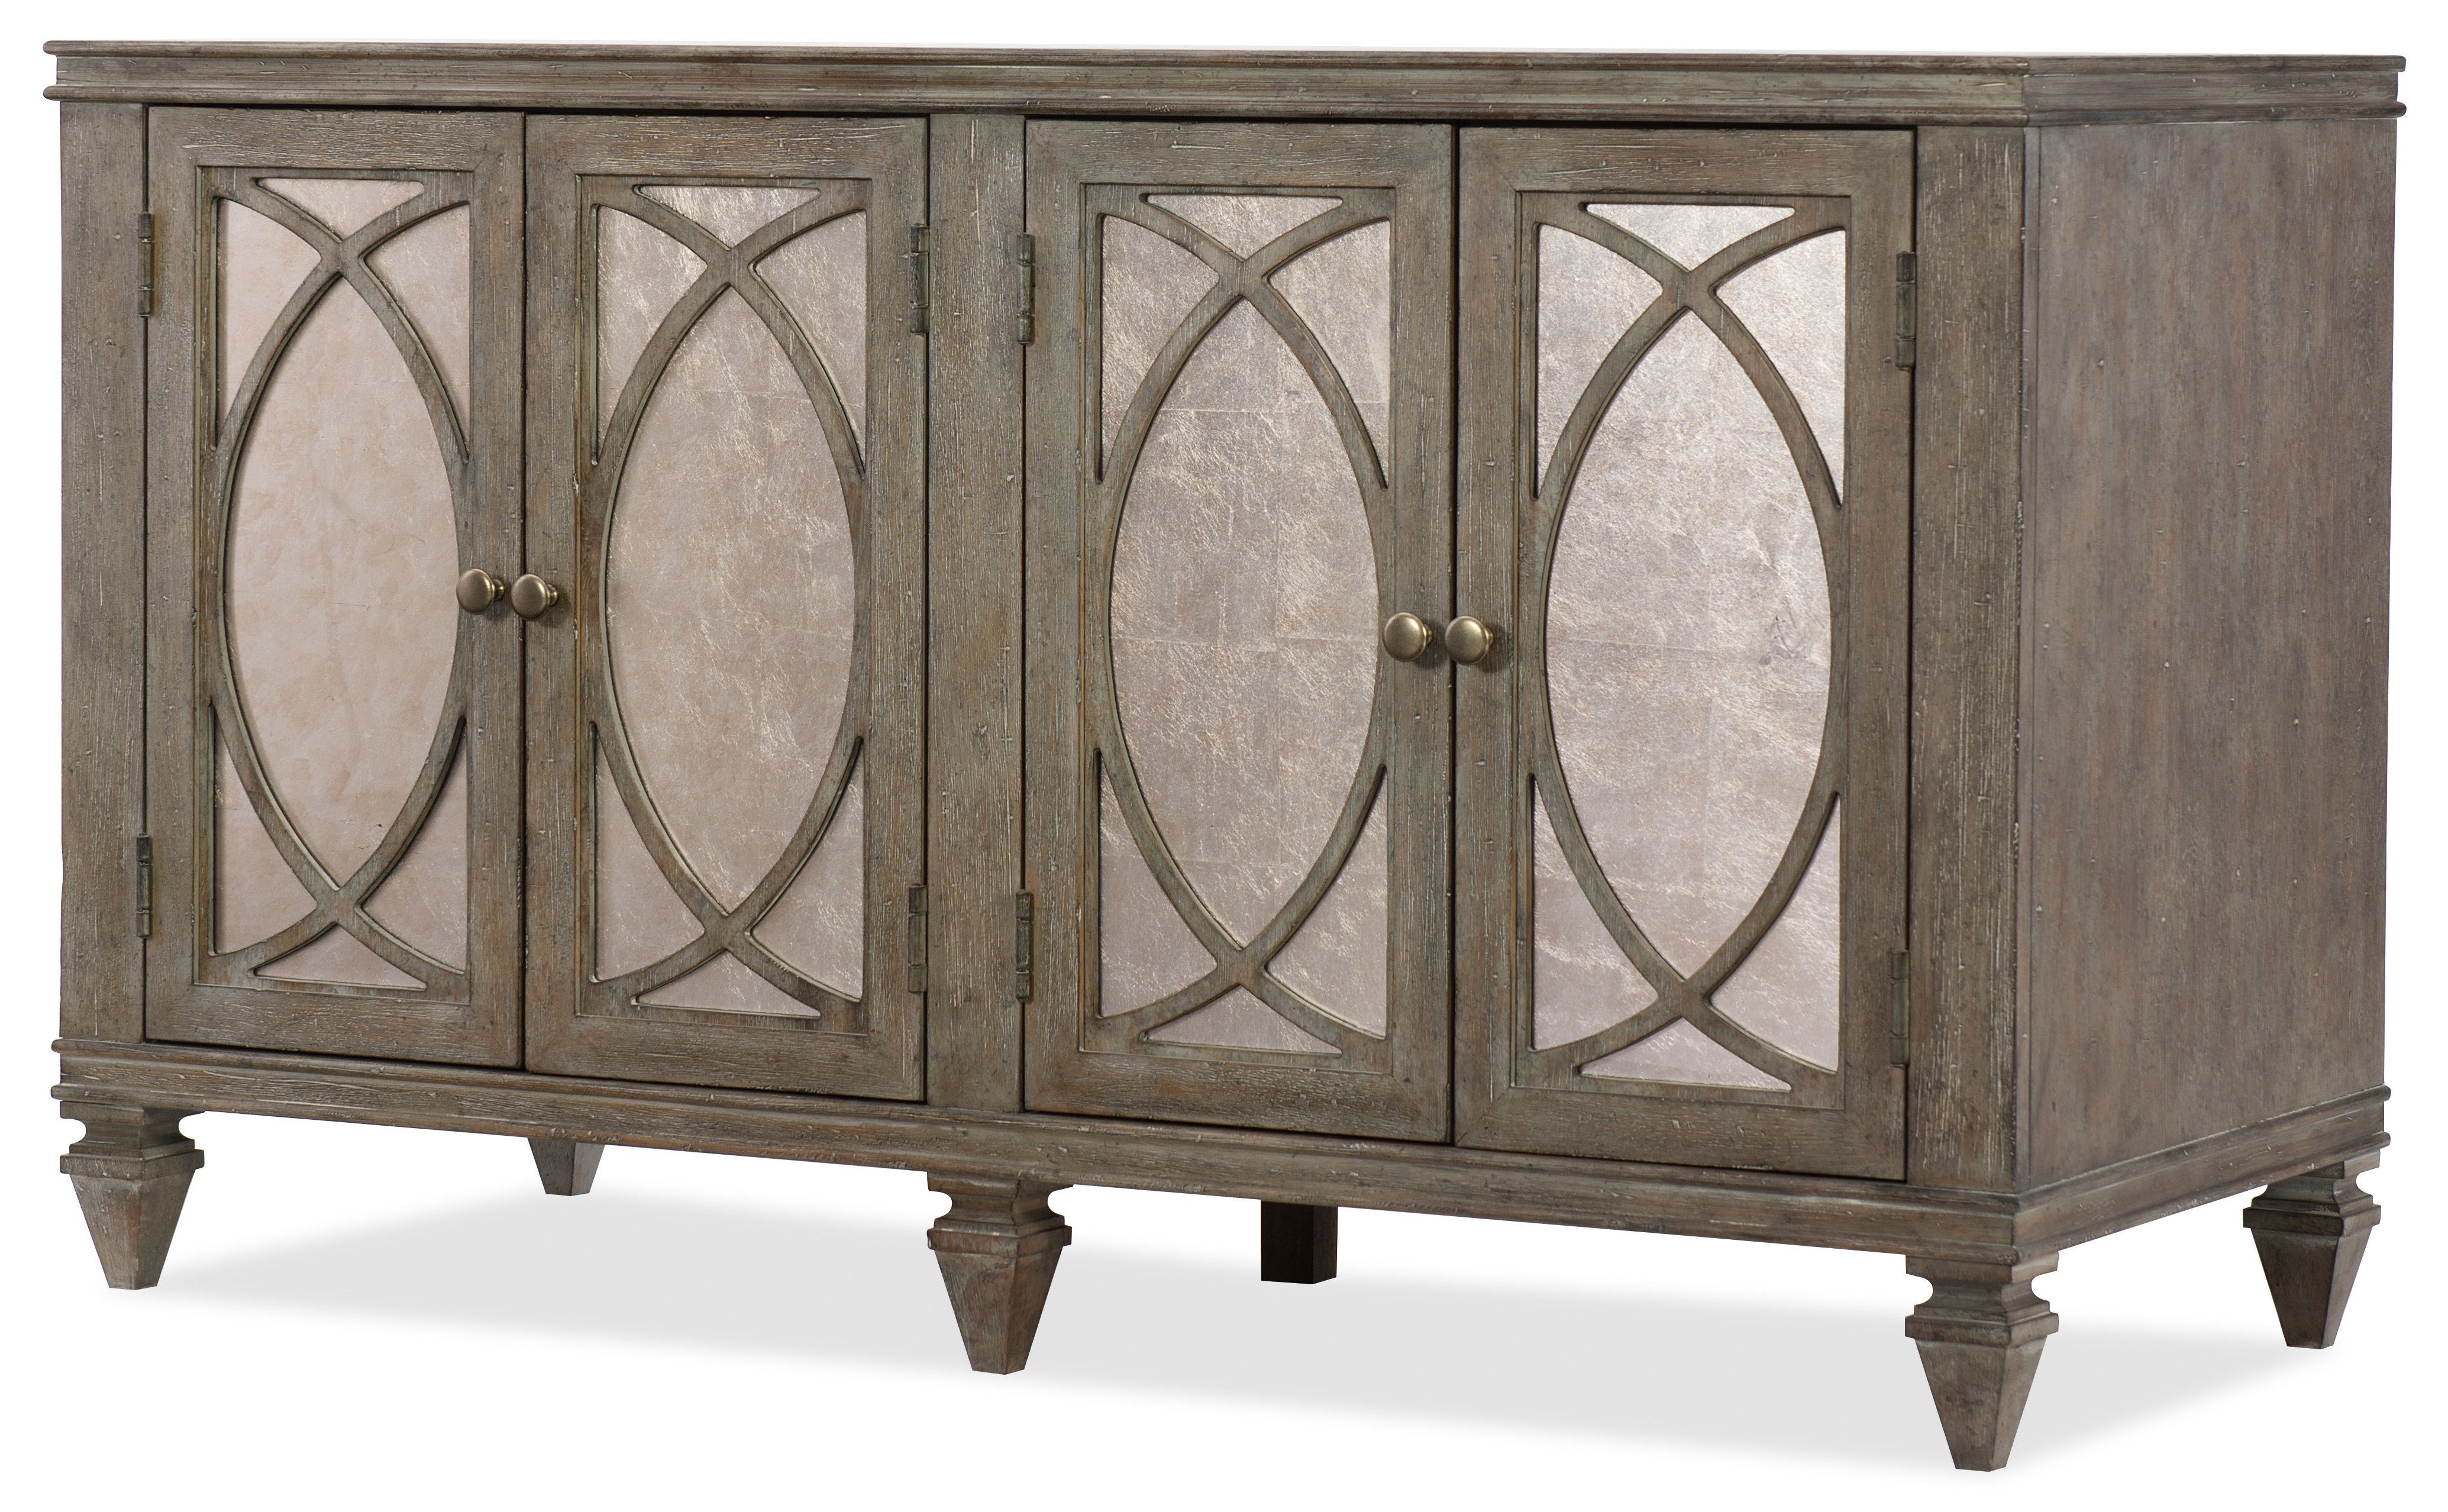 Hooker Furniture Yowell Credenza Pertaining To Candace Door Credenzas (View 18 of 20)